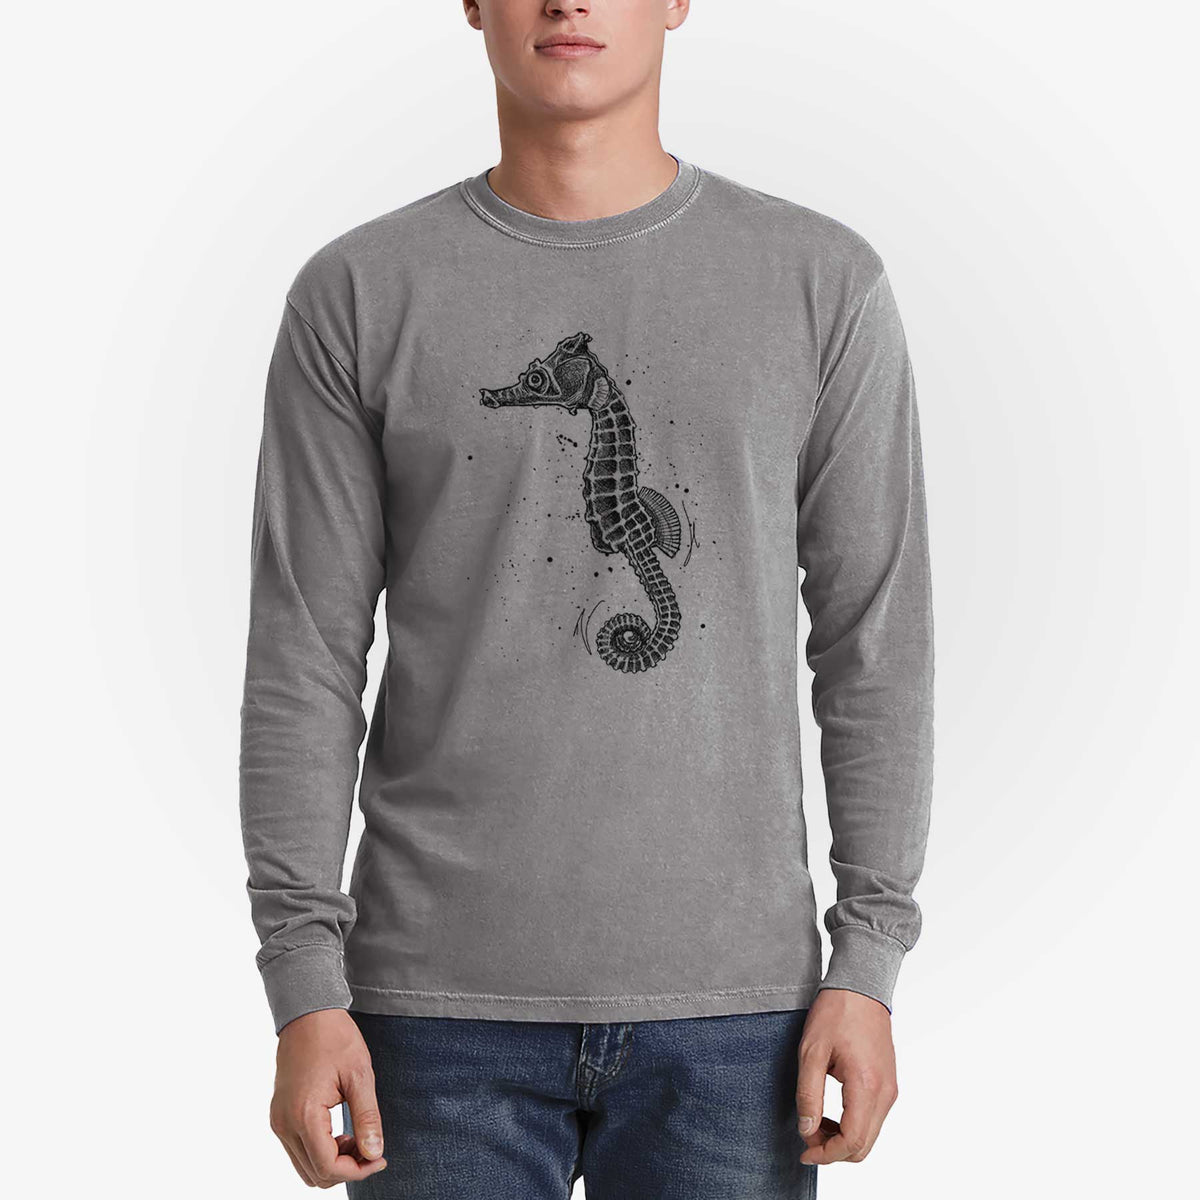 Hippocampus ingens - Pacific Seahorse - Heavyweight 100% Cotton Long Sleeve